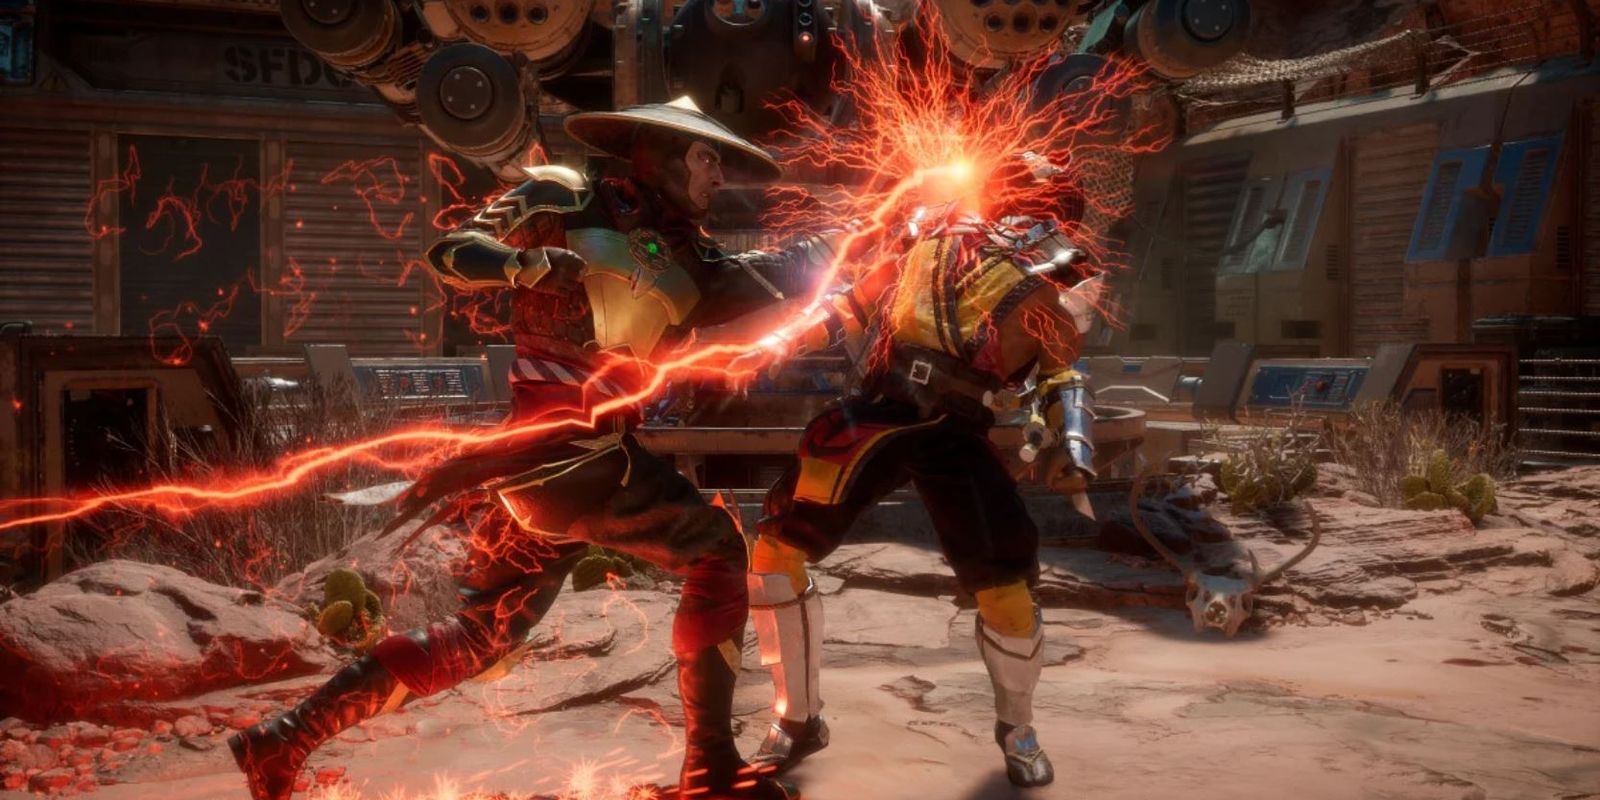 Which Fighters Mortal Kombat 12 Needs The Most